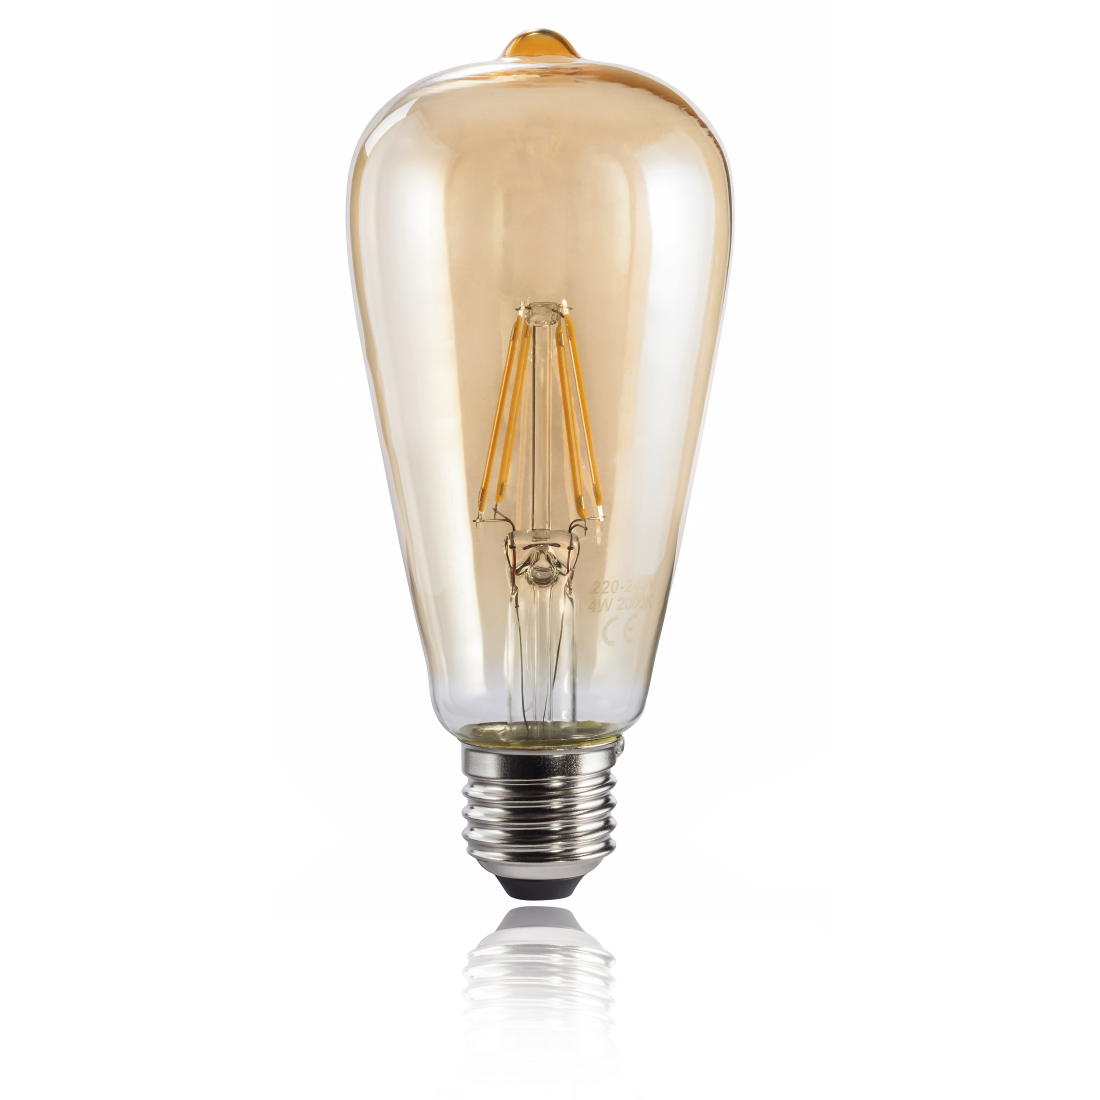 abx2 High-Res Image 2 - Xavax, LED Filament, E27, 400lm replaces 35W, vintage bulb, warm white